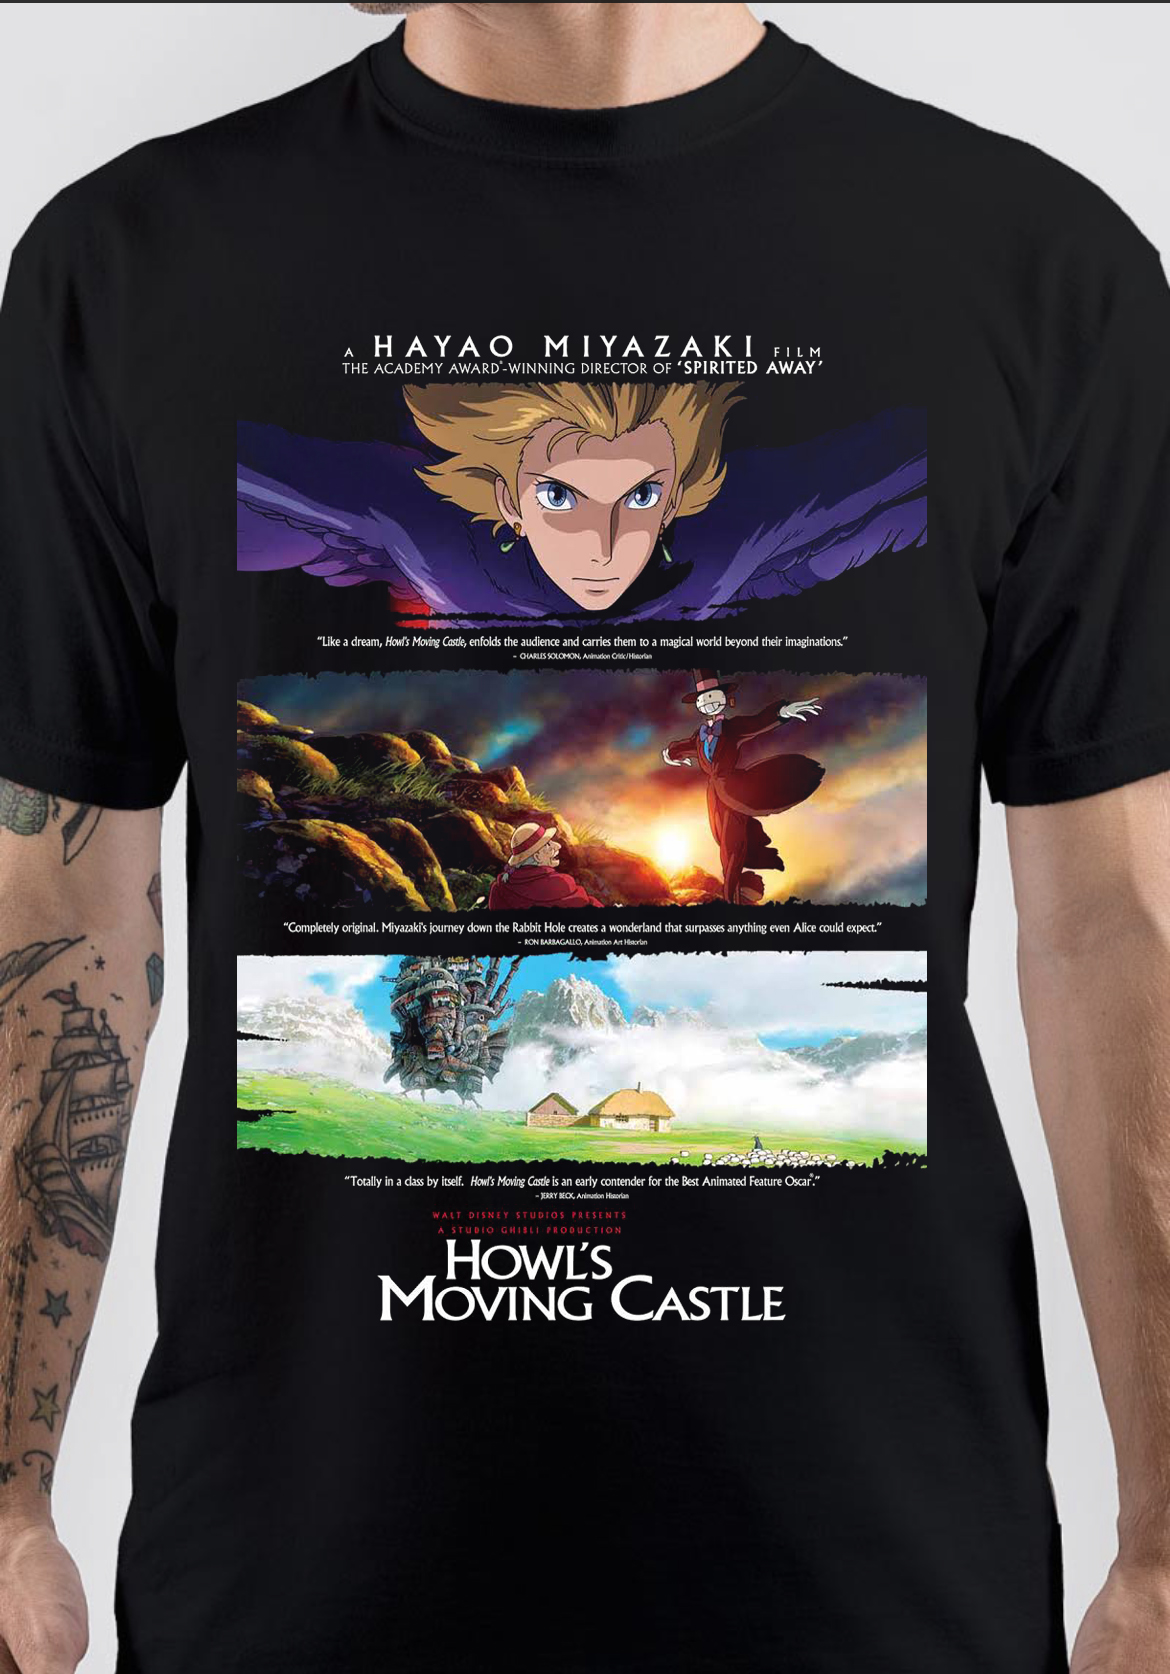 Howl's Moving Castle T-Shirt And Merchandise